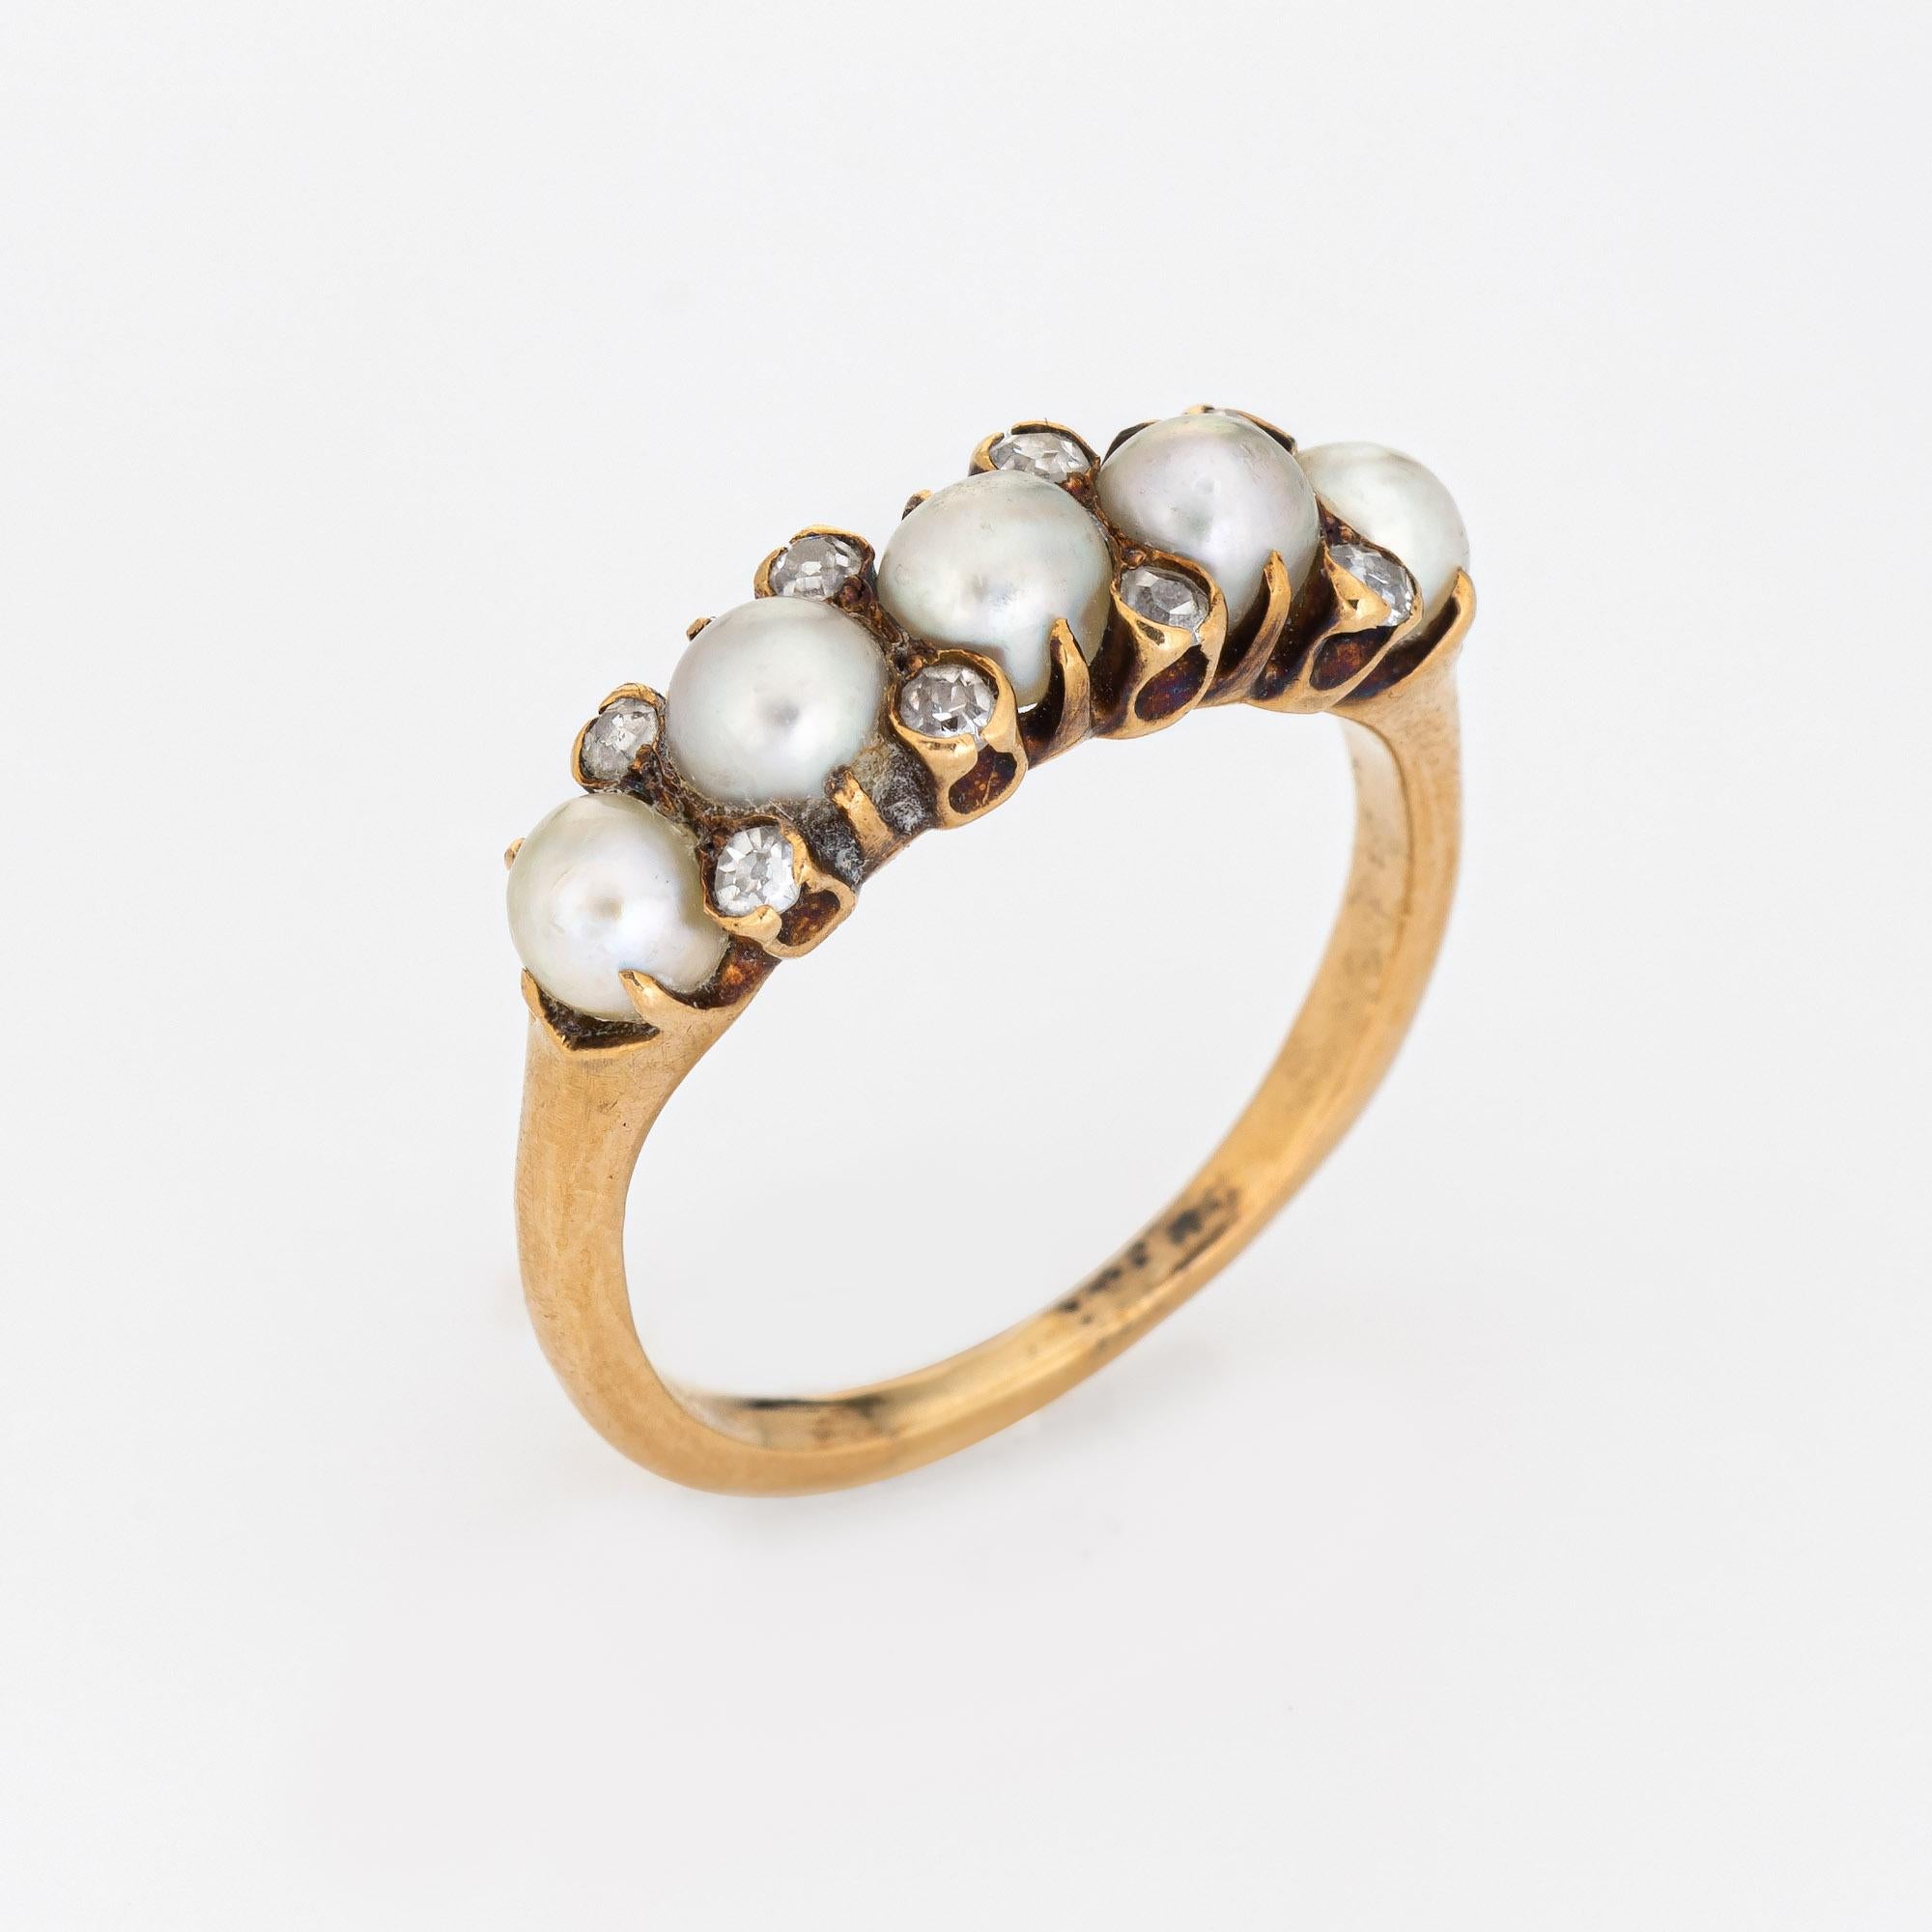 Finely detailed vintage Art Deco diamond ring (circa 1920s to 1930s) crafted in platinum. 

8 old single cut diamonds total an estimated 0.08 carats (estimated at H-I color and SI1-I2 clarity). Five cultured pearls measure 3mm. The pearls are well